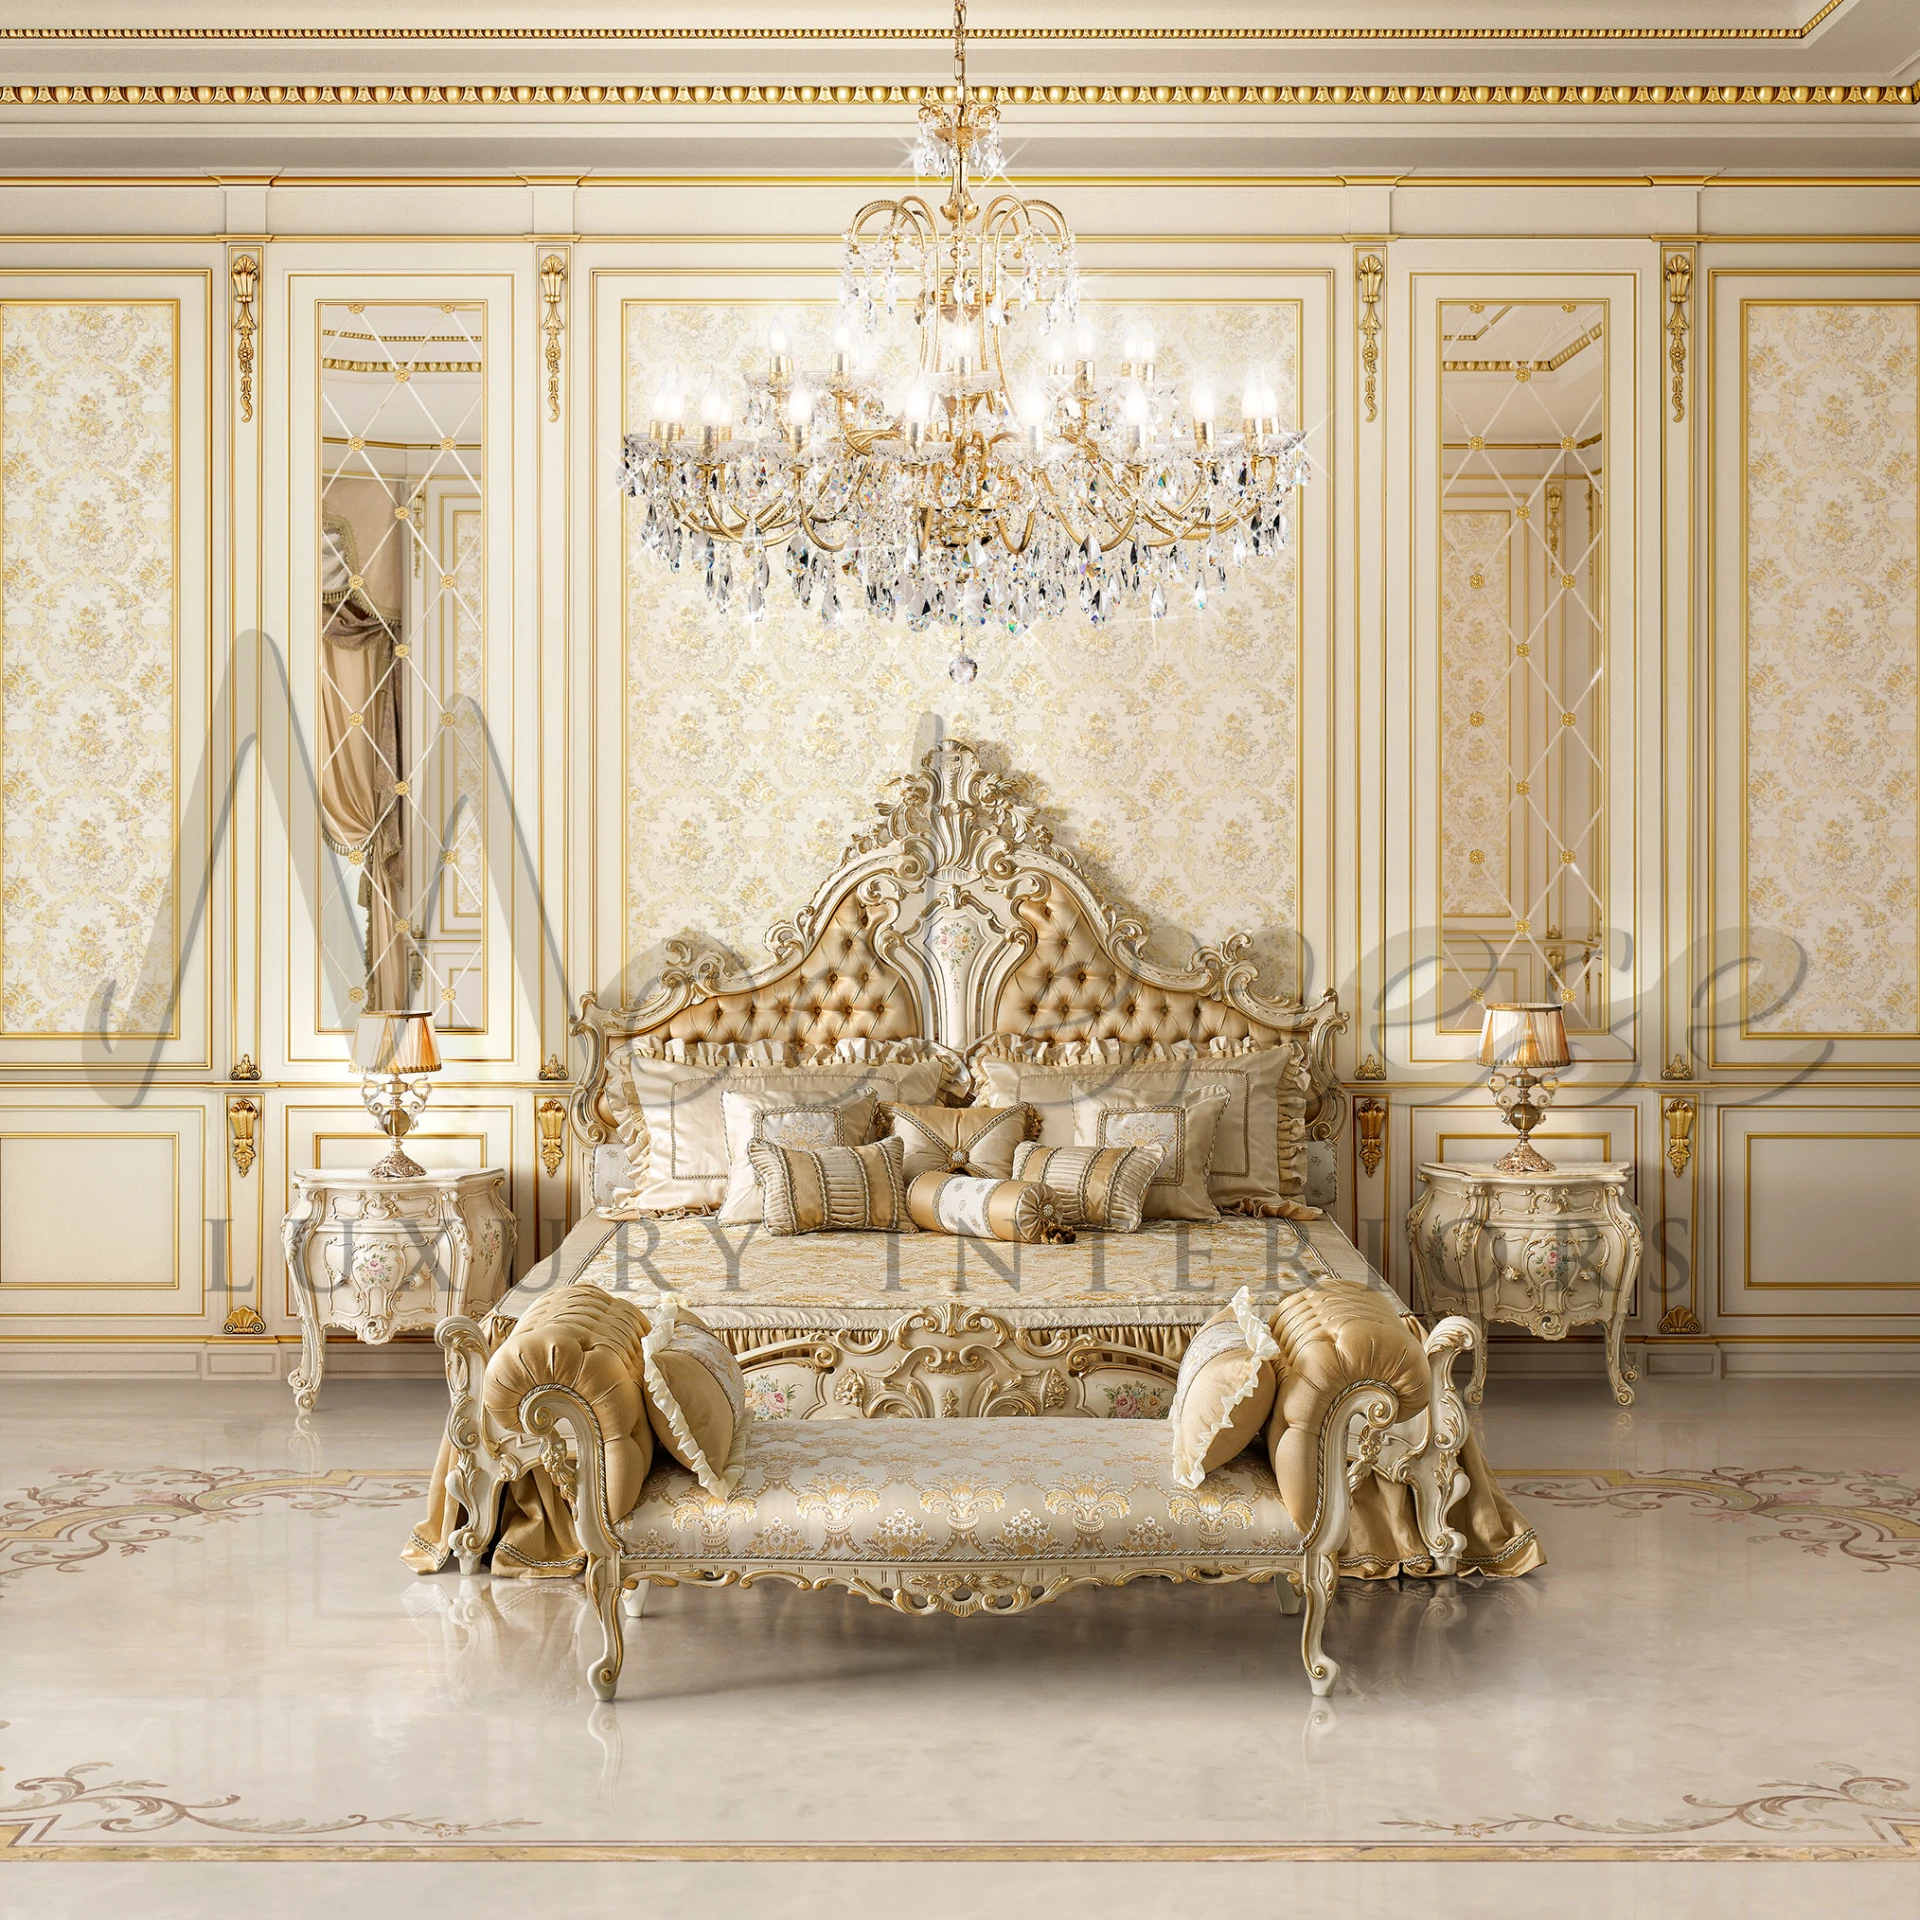 Luxurious bedroom with an fancy golden bed and luxurious classic italian crystal chandelier by Modenese